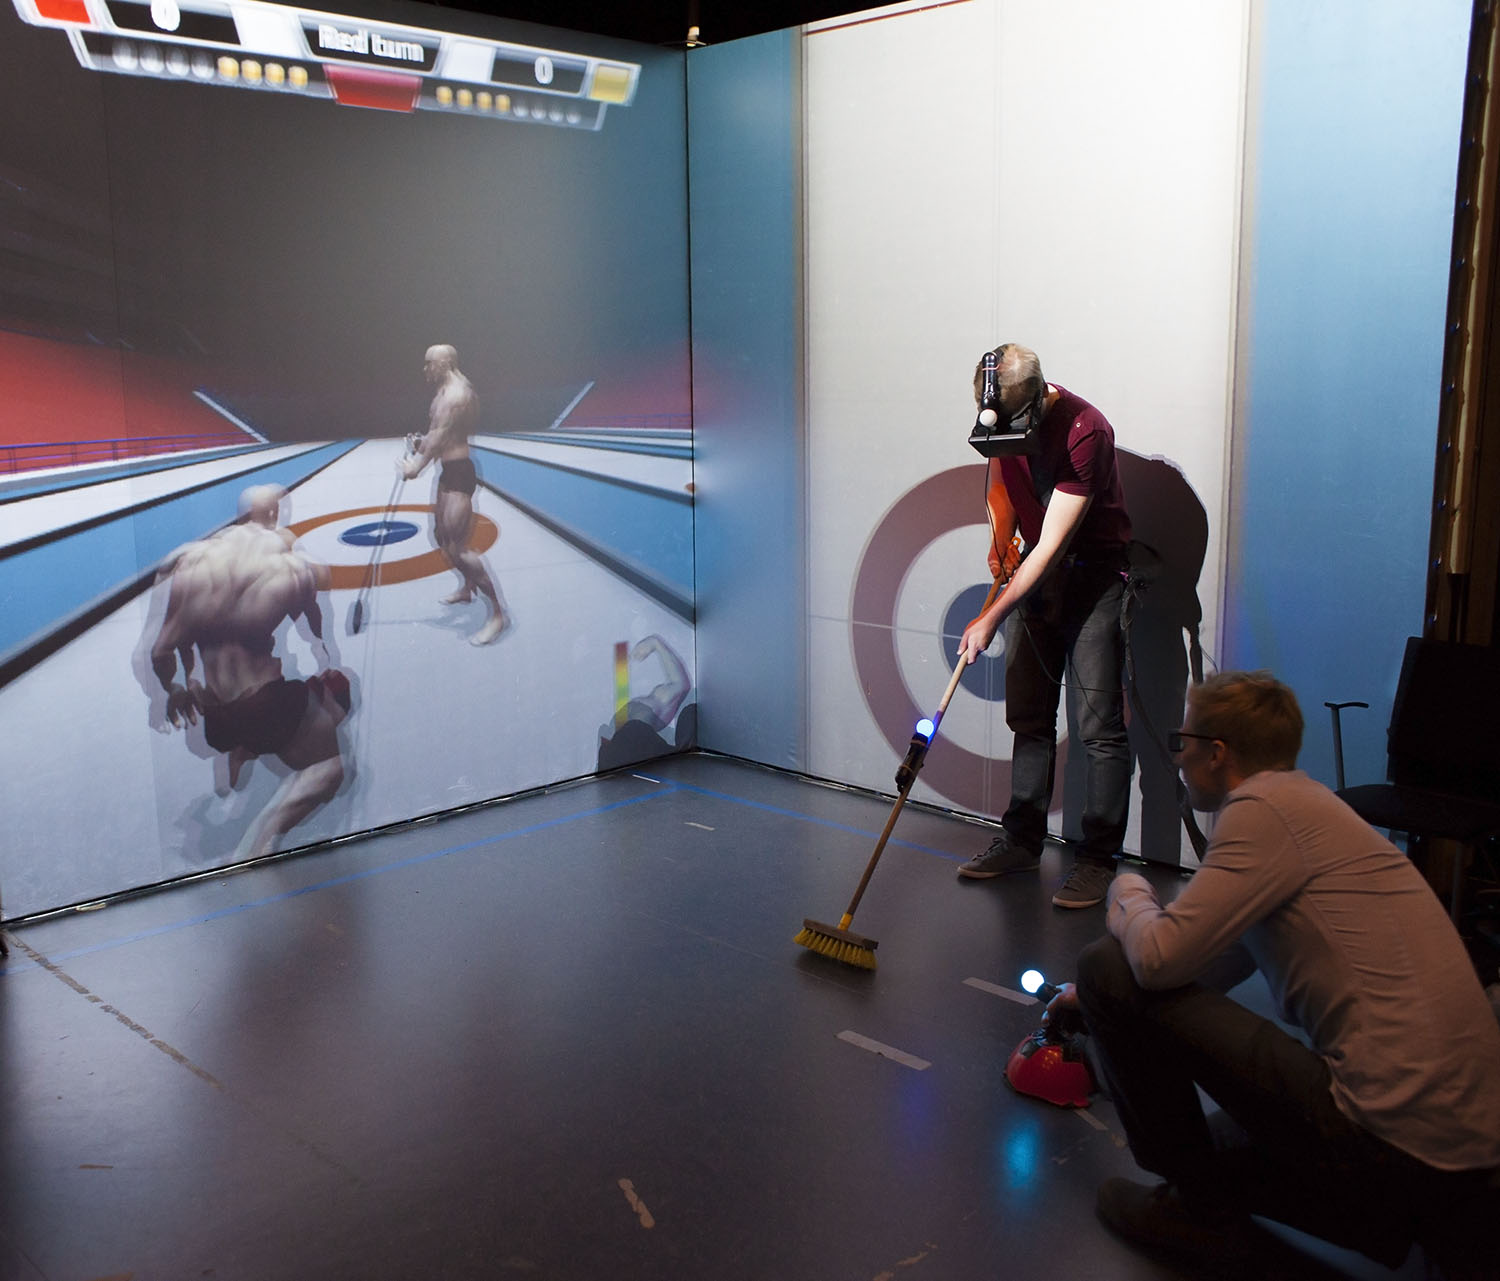 Two player co-operative curling simulator where one player is a curler who "throws" stones, and the another player acts as a sweeper, affecting the trajectory of the stones while it slides on ice.